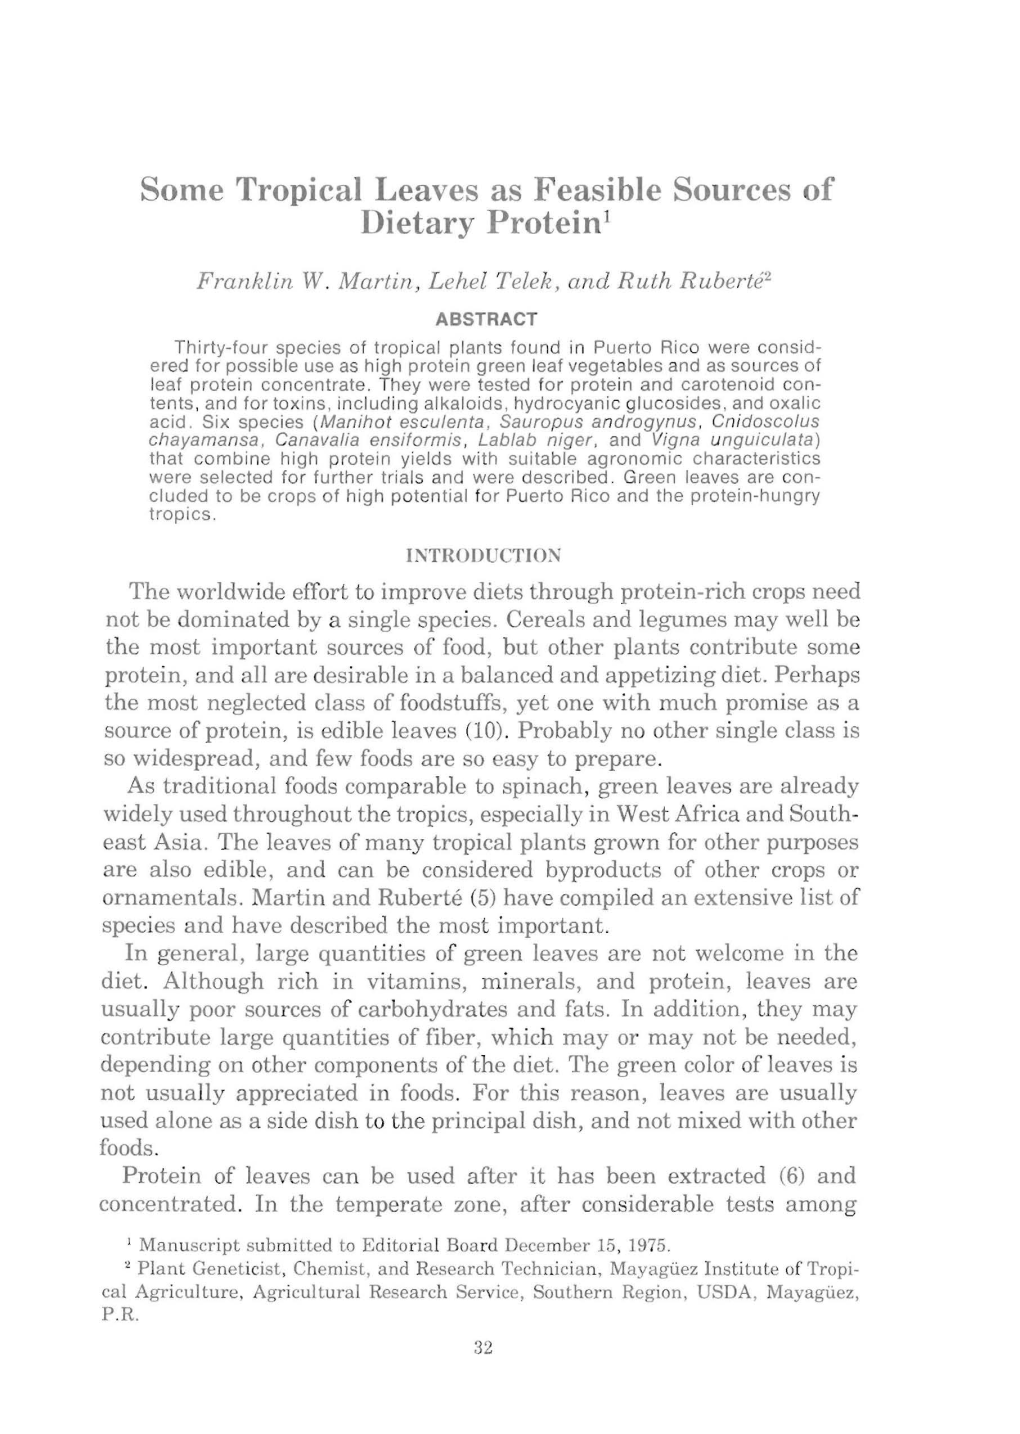 Some Tropical Leaves As Feasible Sources of Dietary Protein 1